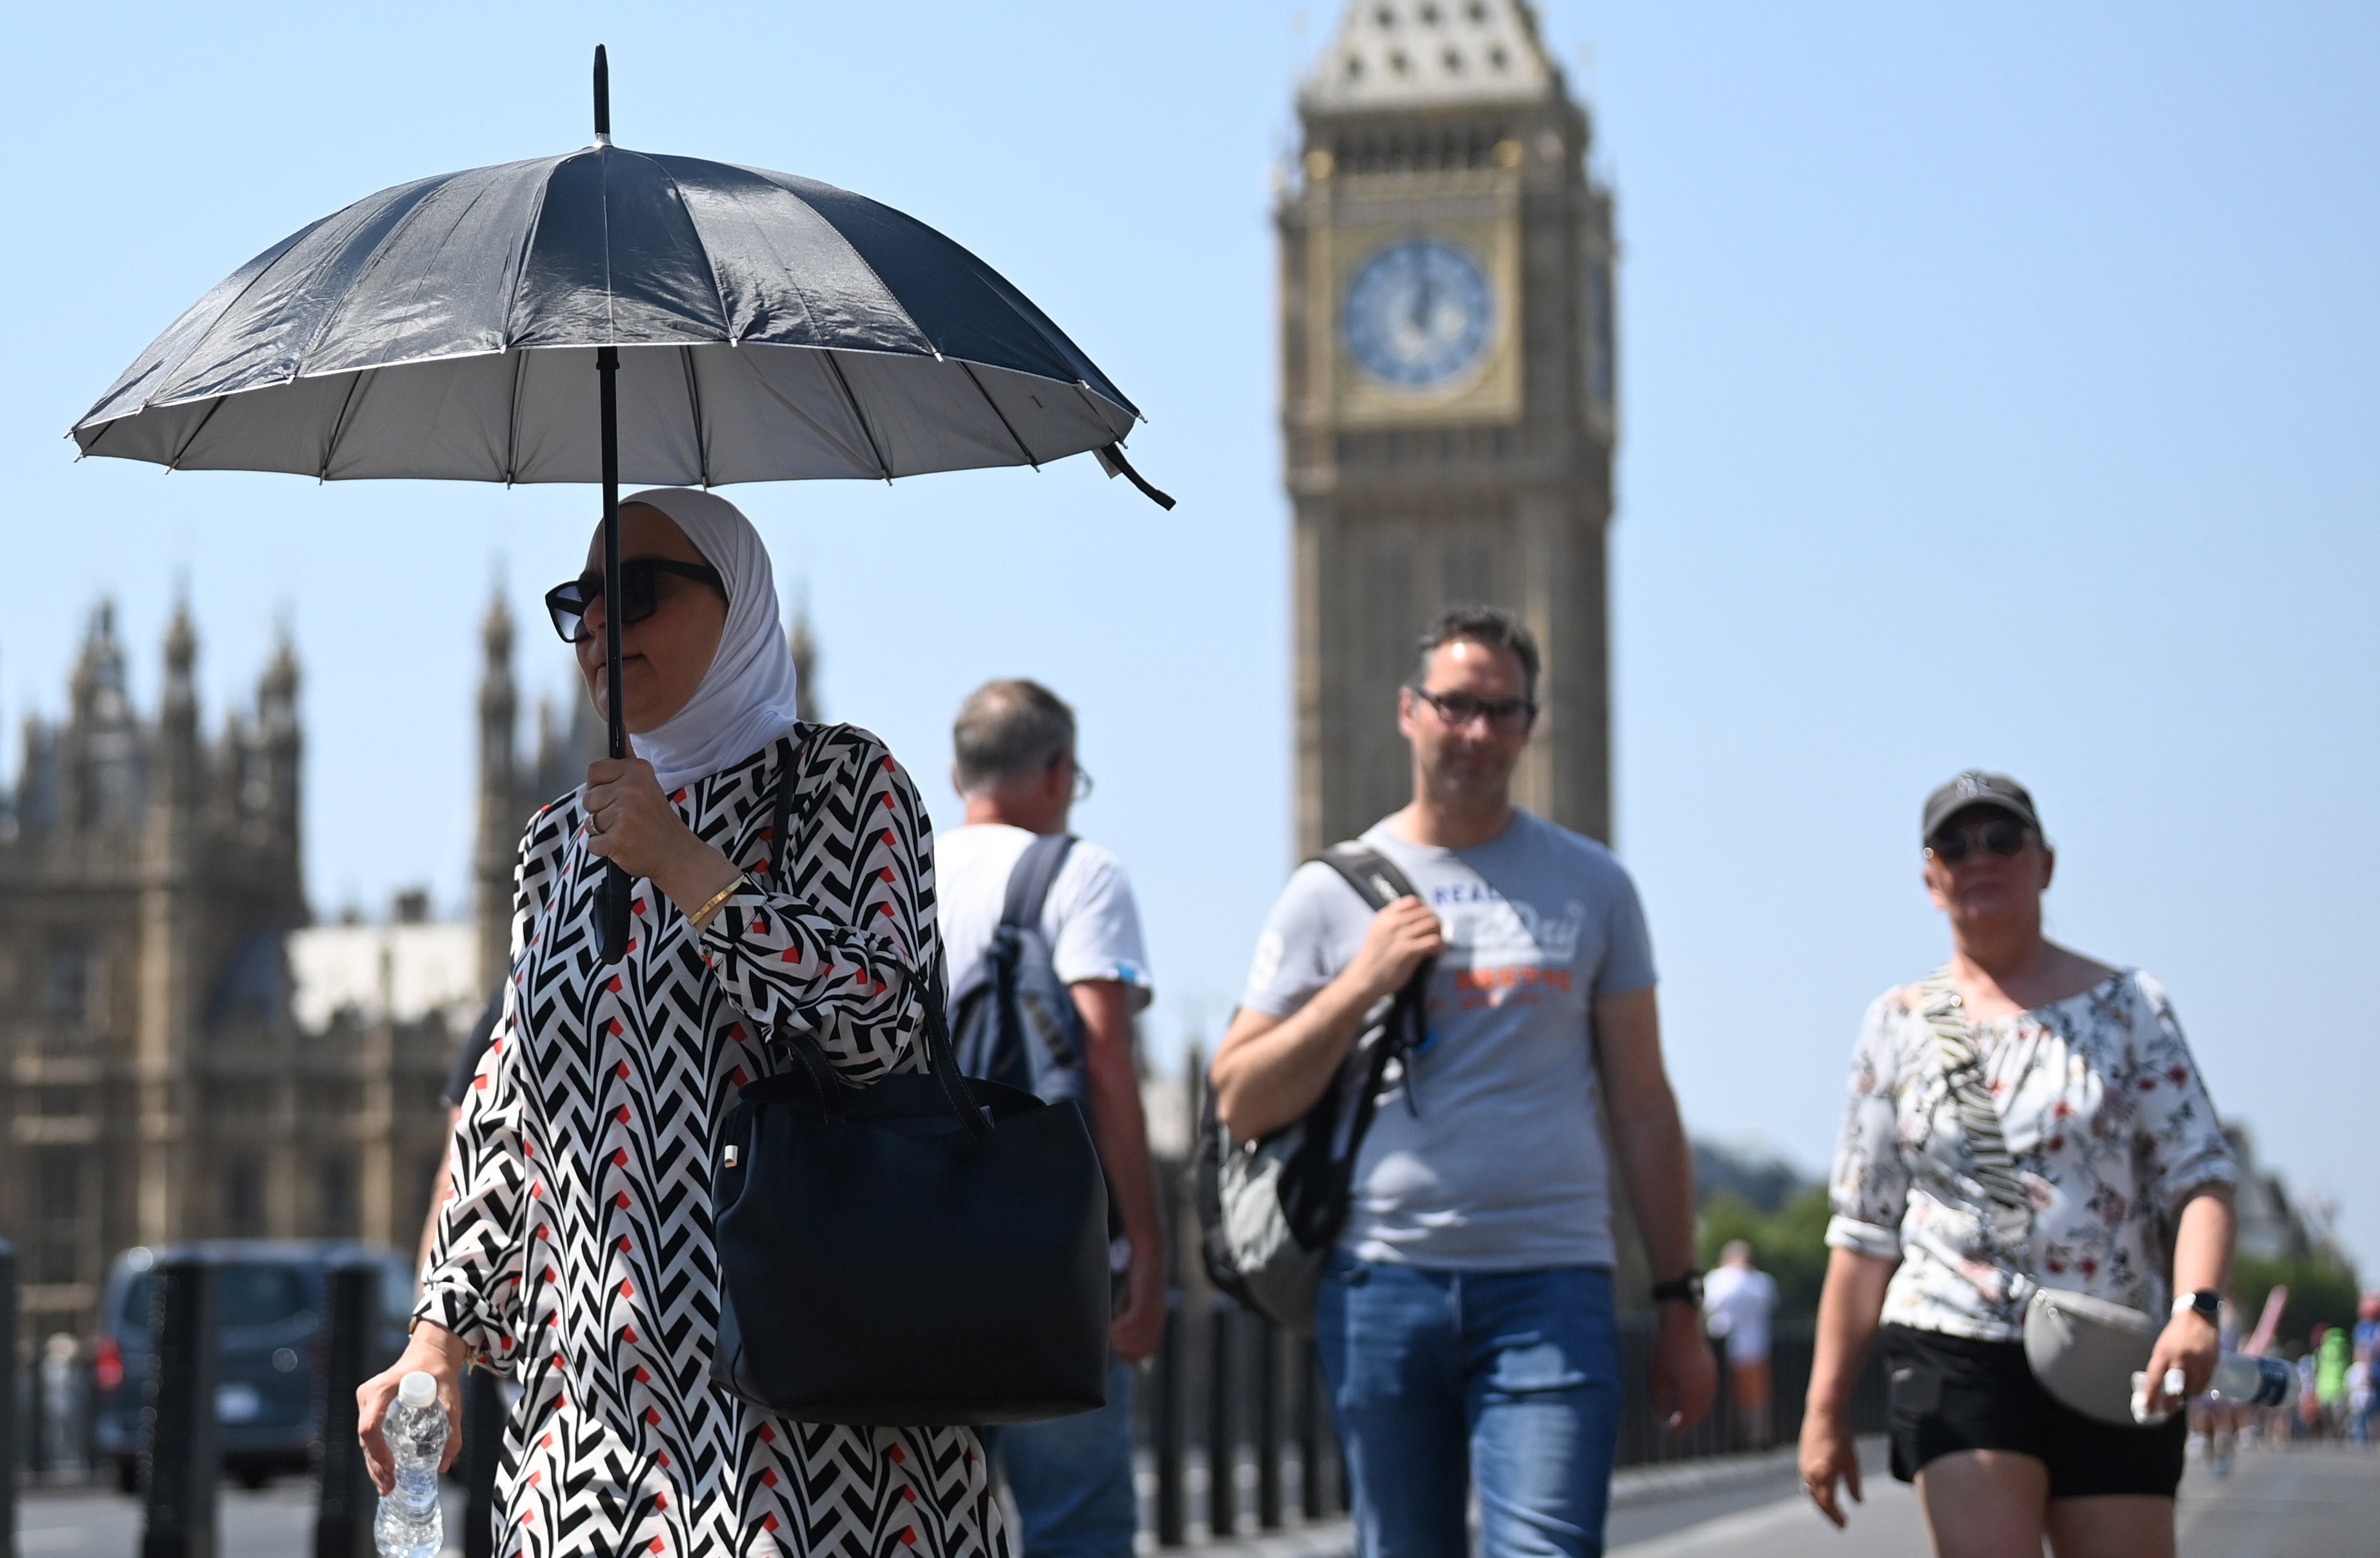 The UK was hit with record 40C temperatures earlier this month